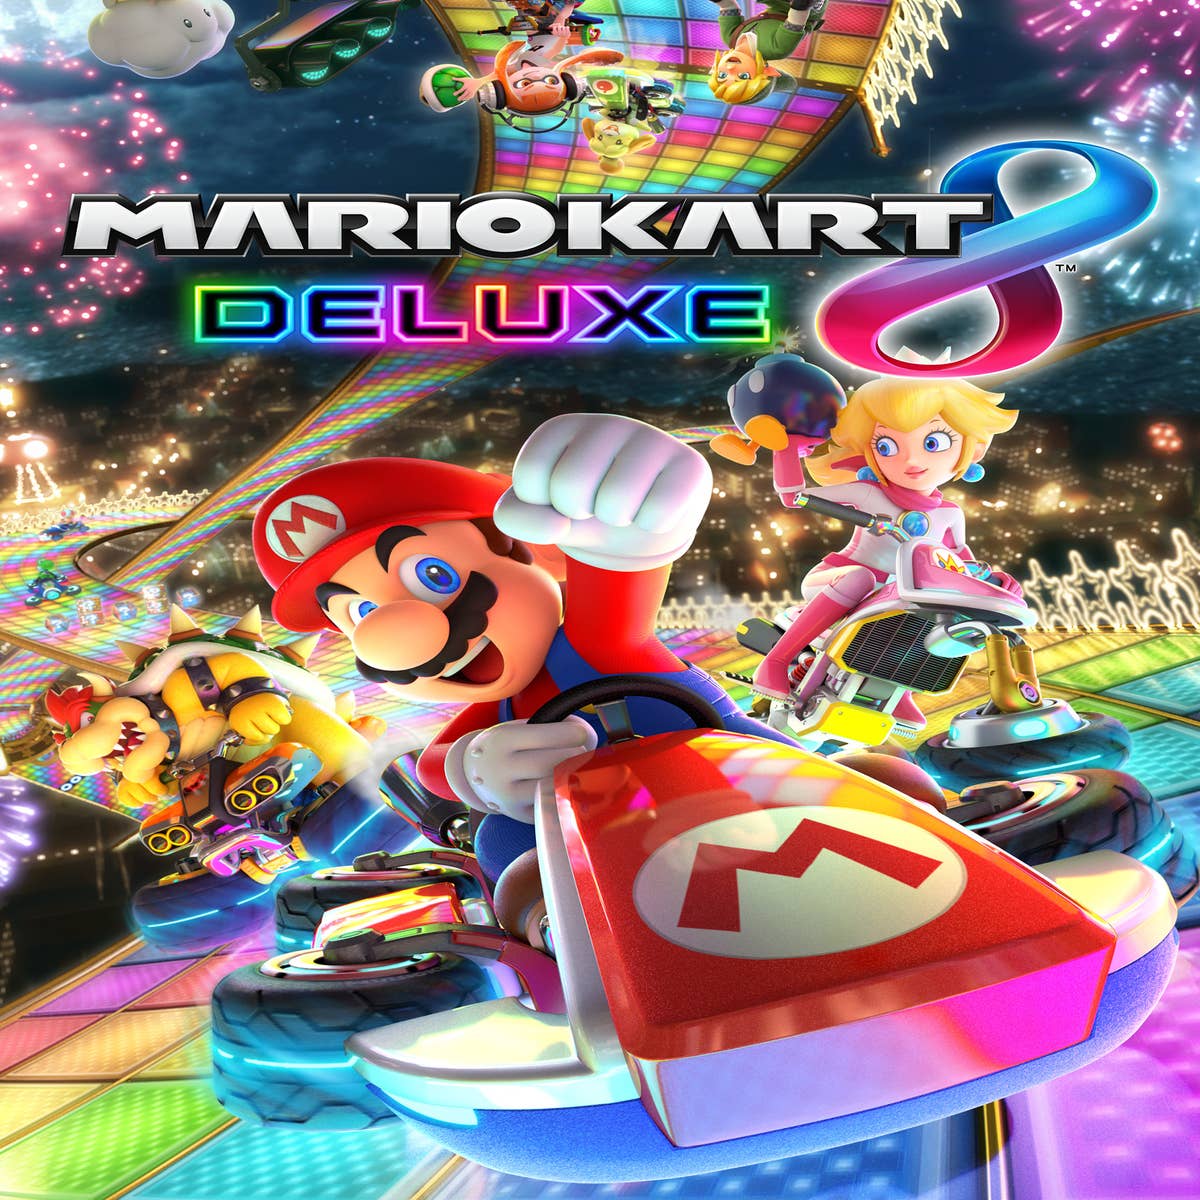 Nintendo 3DS: Awesome New Mario Kart 7 Characters Revealed - My Nintendo  News